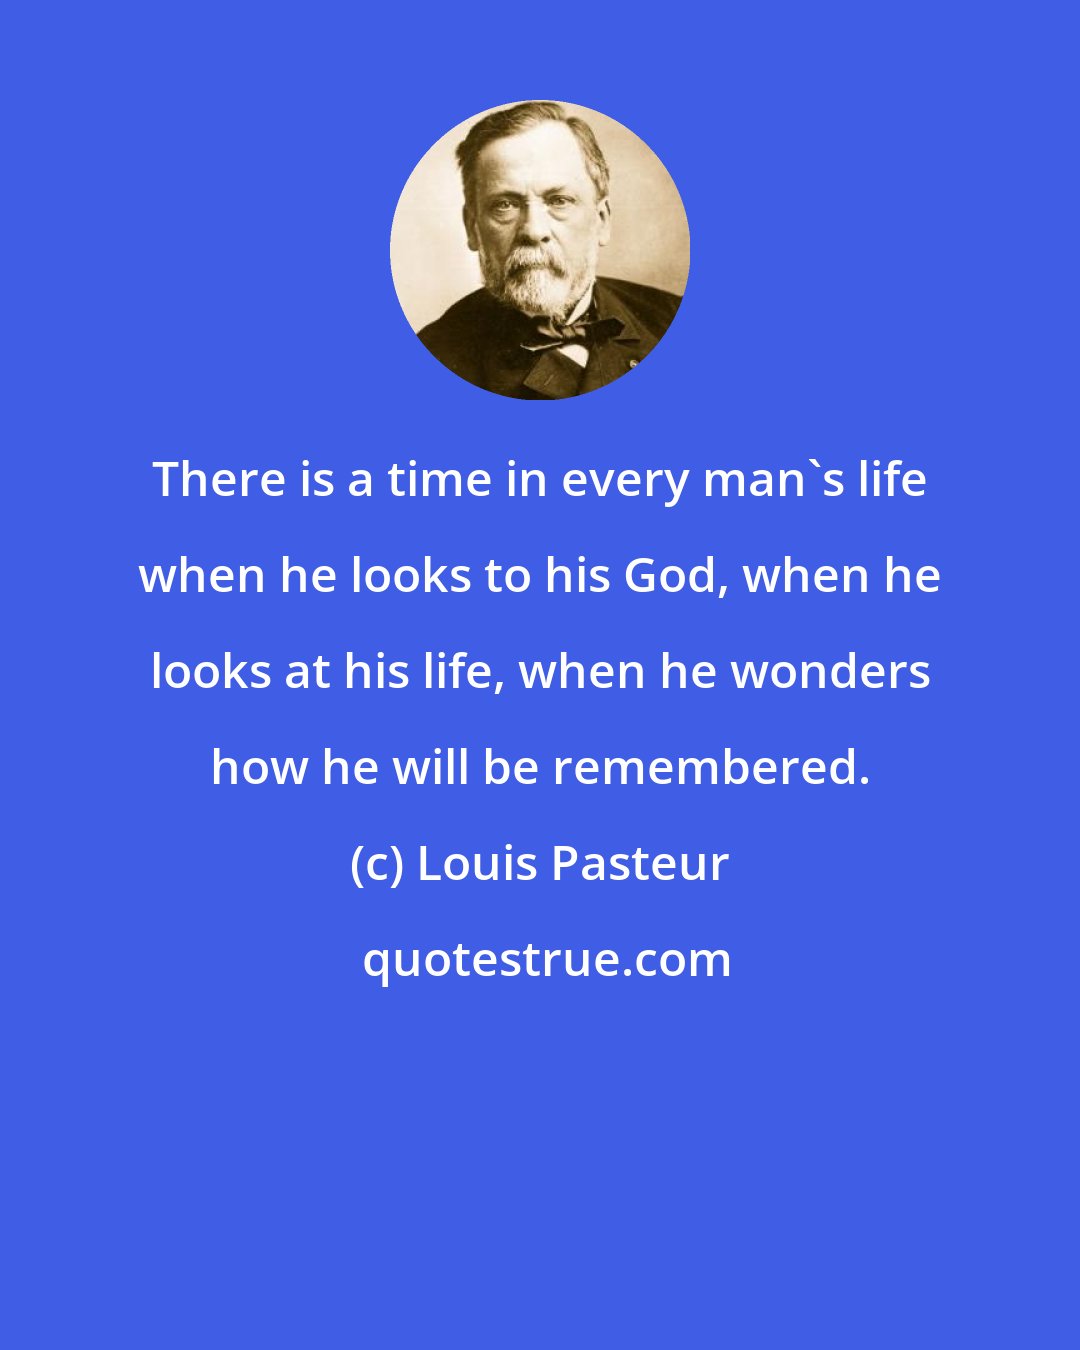 Louis Pasteur: There is a time in every man's life when he looks to his God, when he looks at his life, when he wonders how he will be remembered.